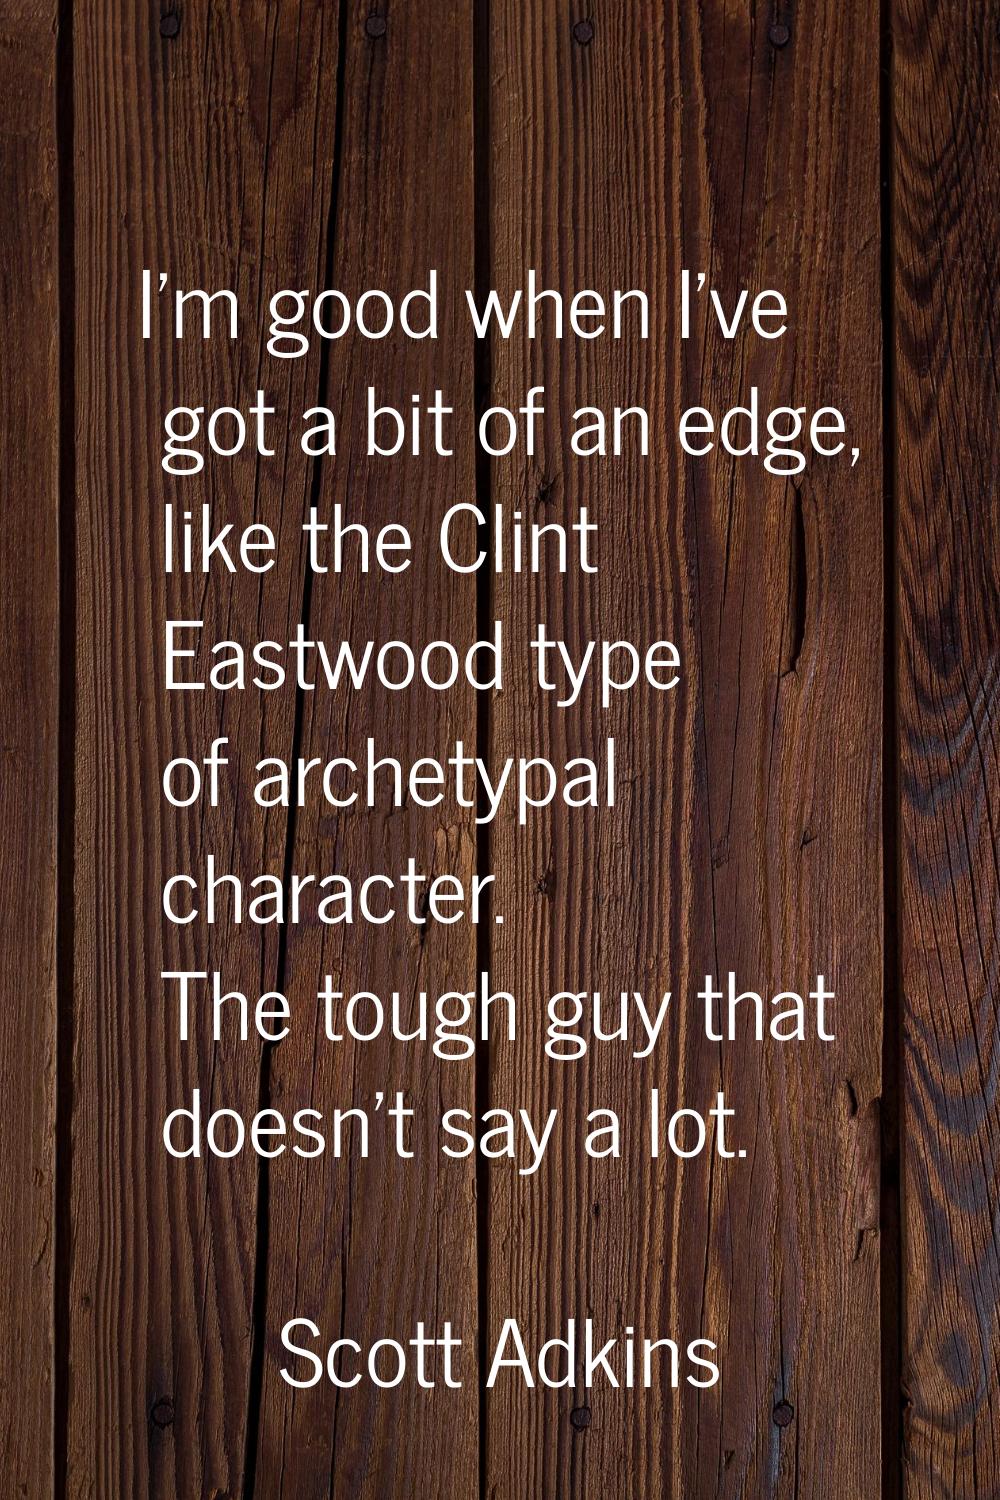 I'm good when I've got a bit of an edge, like the Clint Eastwood type of archetypal character. The 